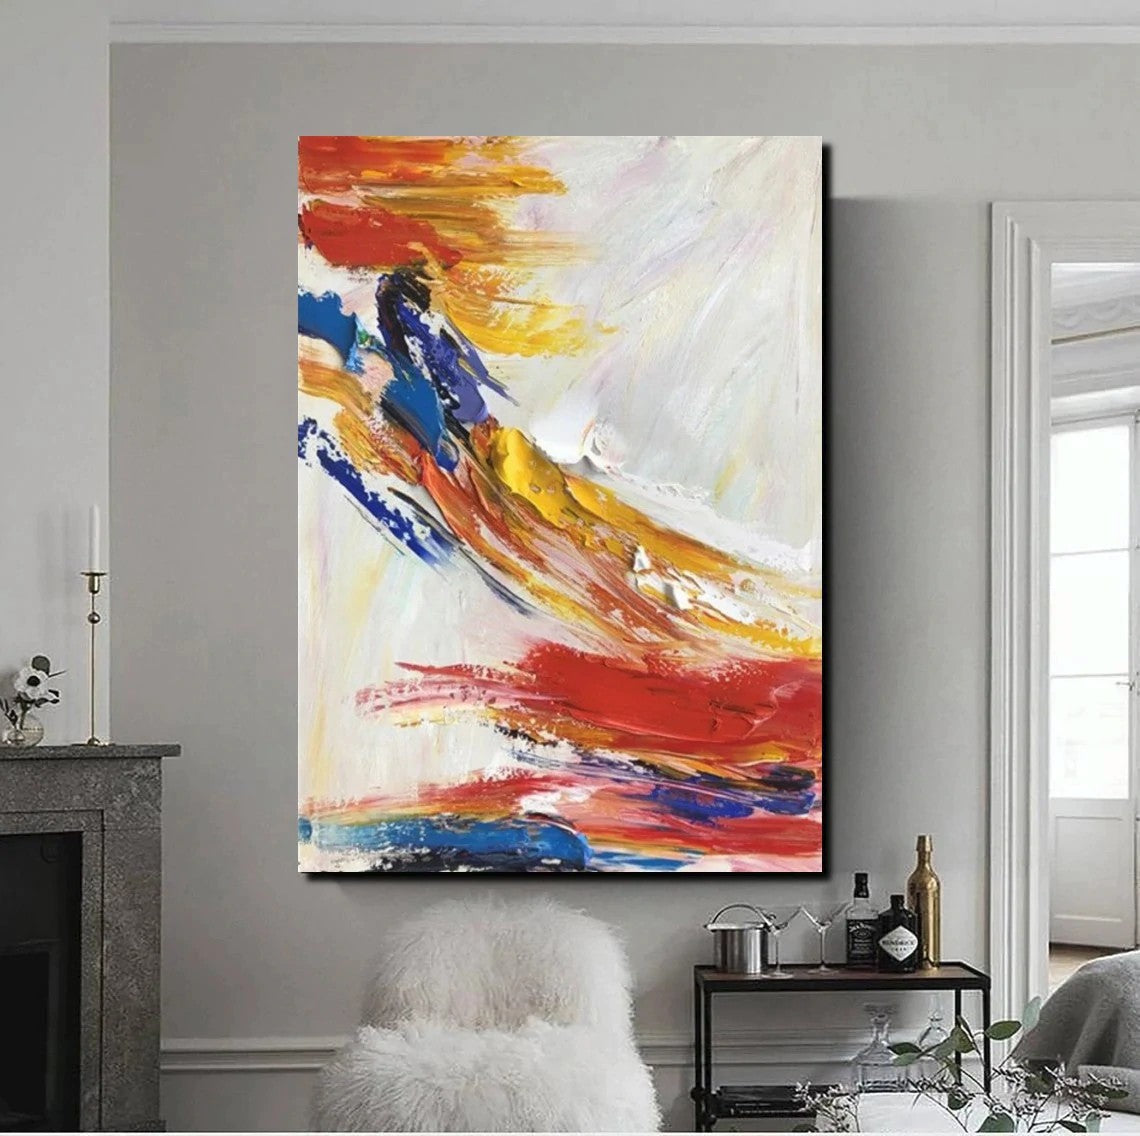 Living Room Wall Art Paintings, Acrylic Abstract Paintings Behind Sofa, Large Painting Behind Couch, Buy Abstract Painting Online, Simple Modern Art